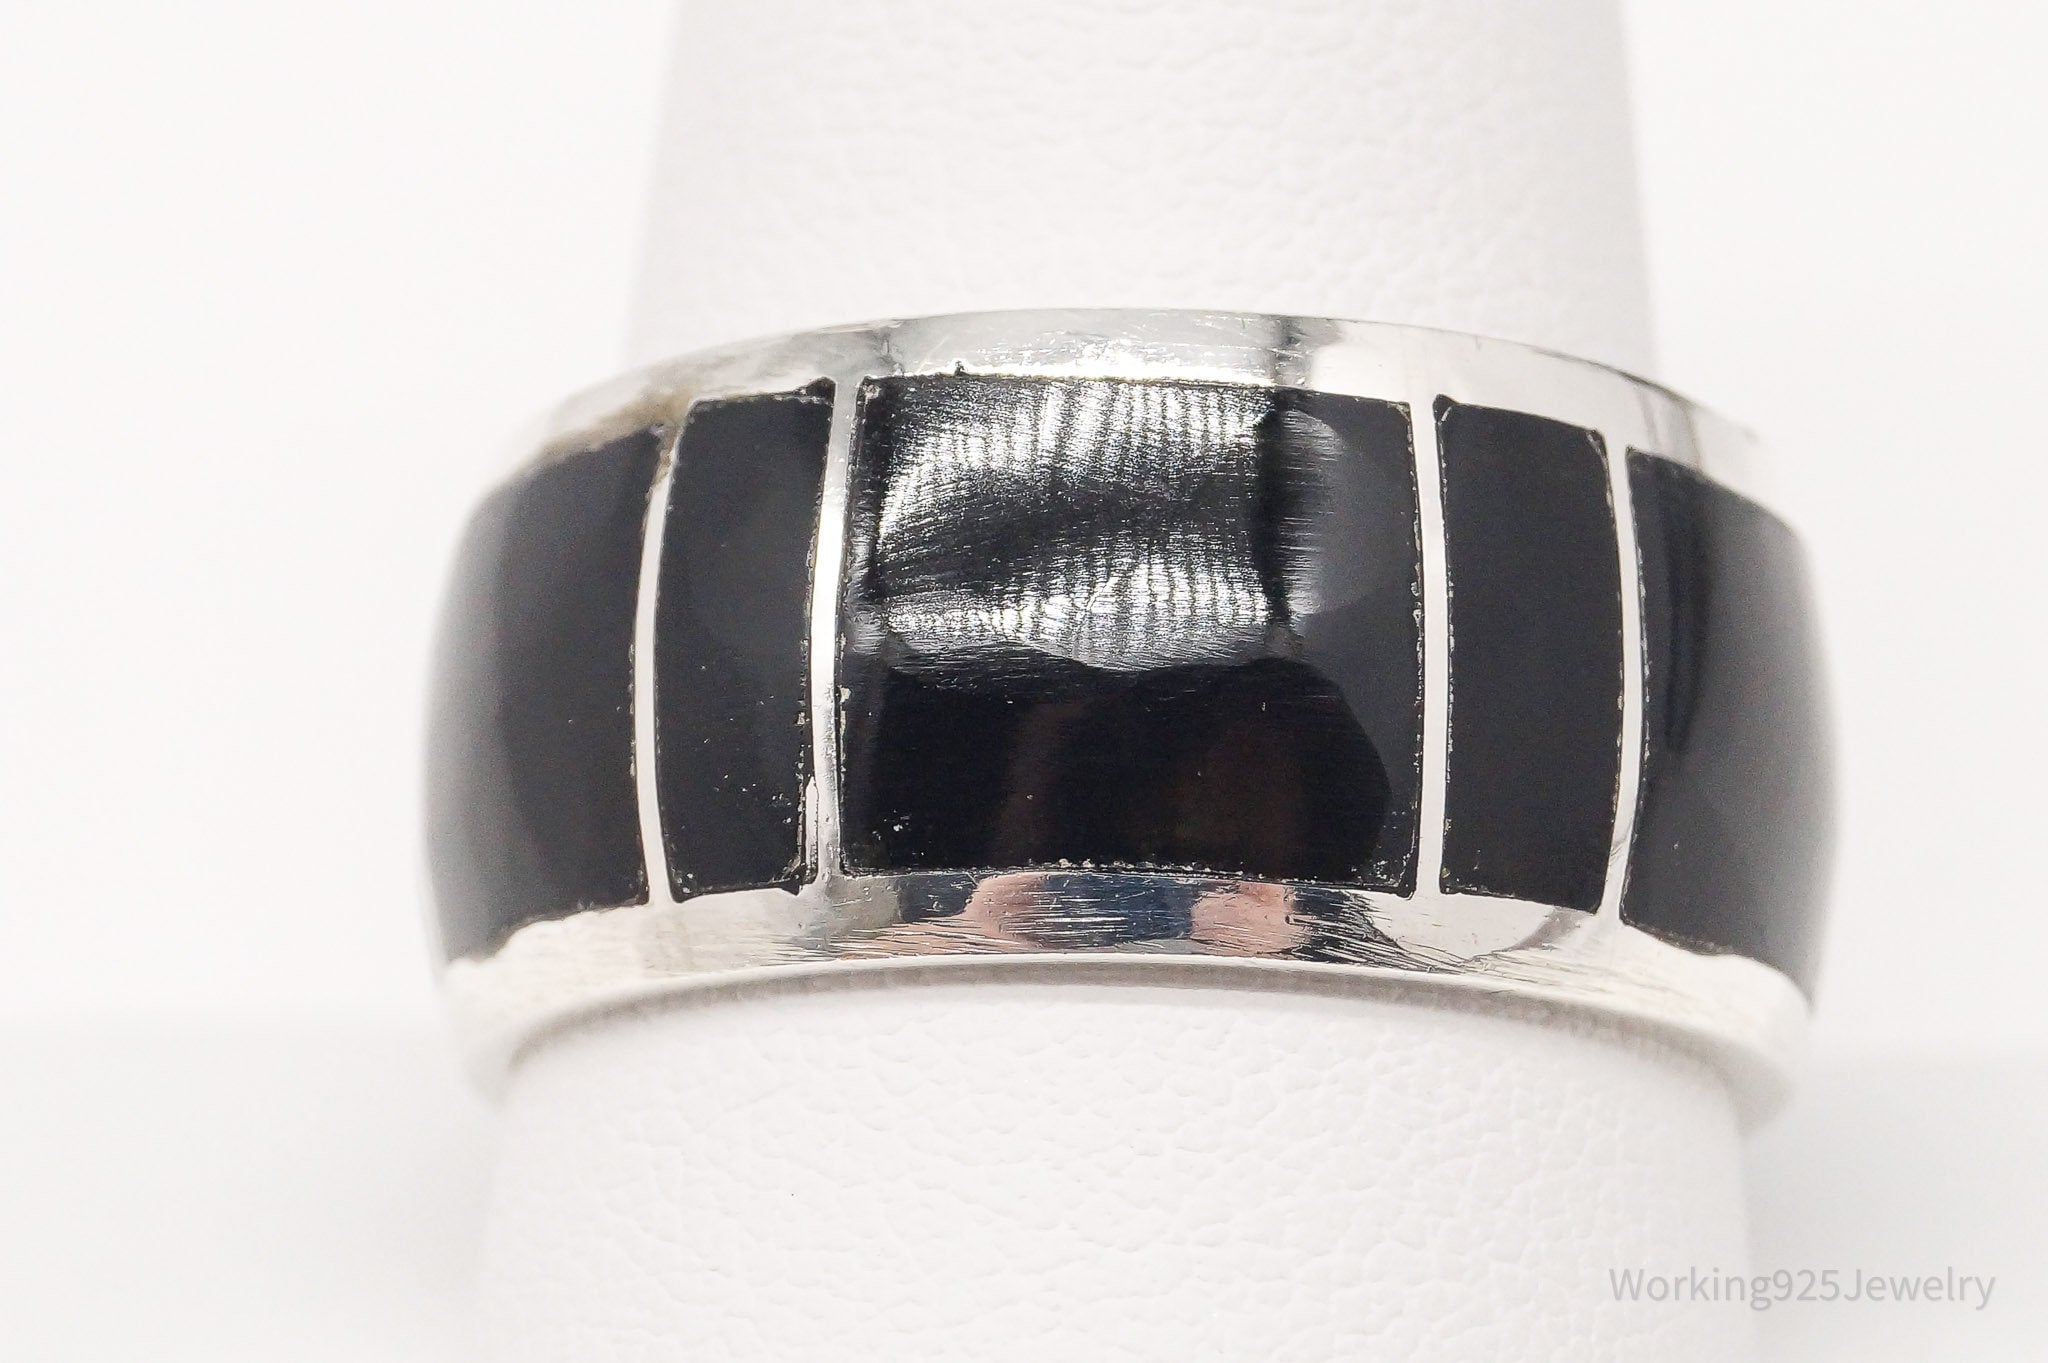 Vintage Mexico Escorcia Black Onyx Inlay Sterling Silver Ring - Size 11